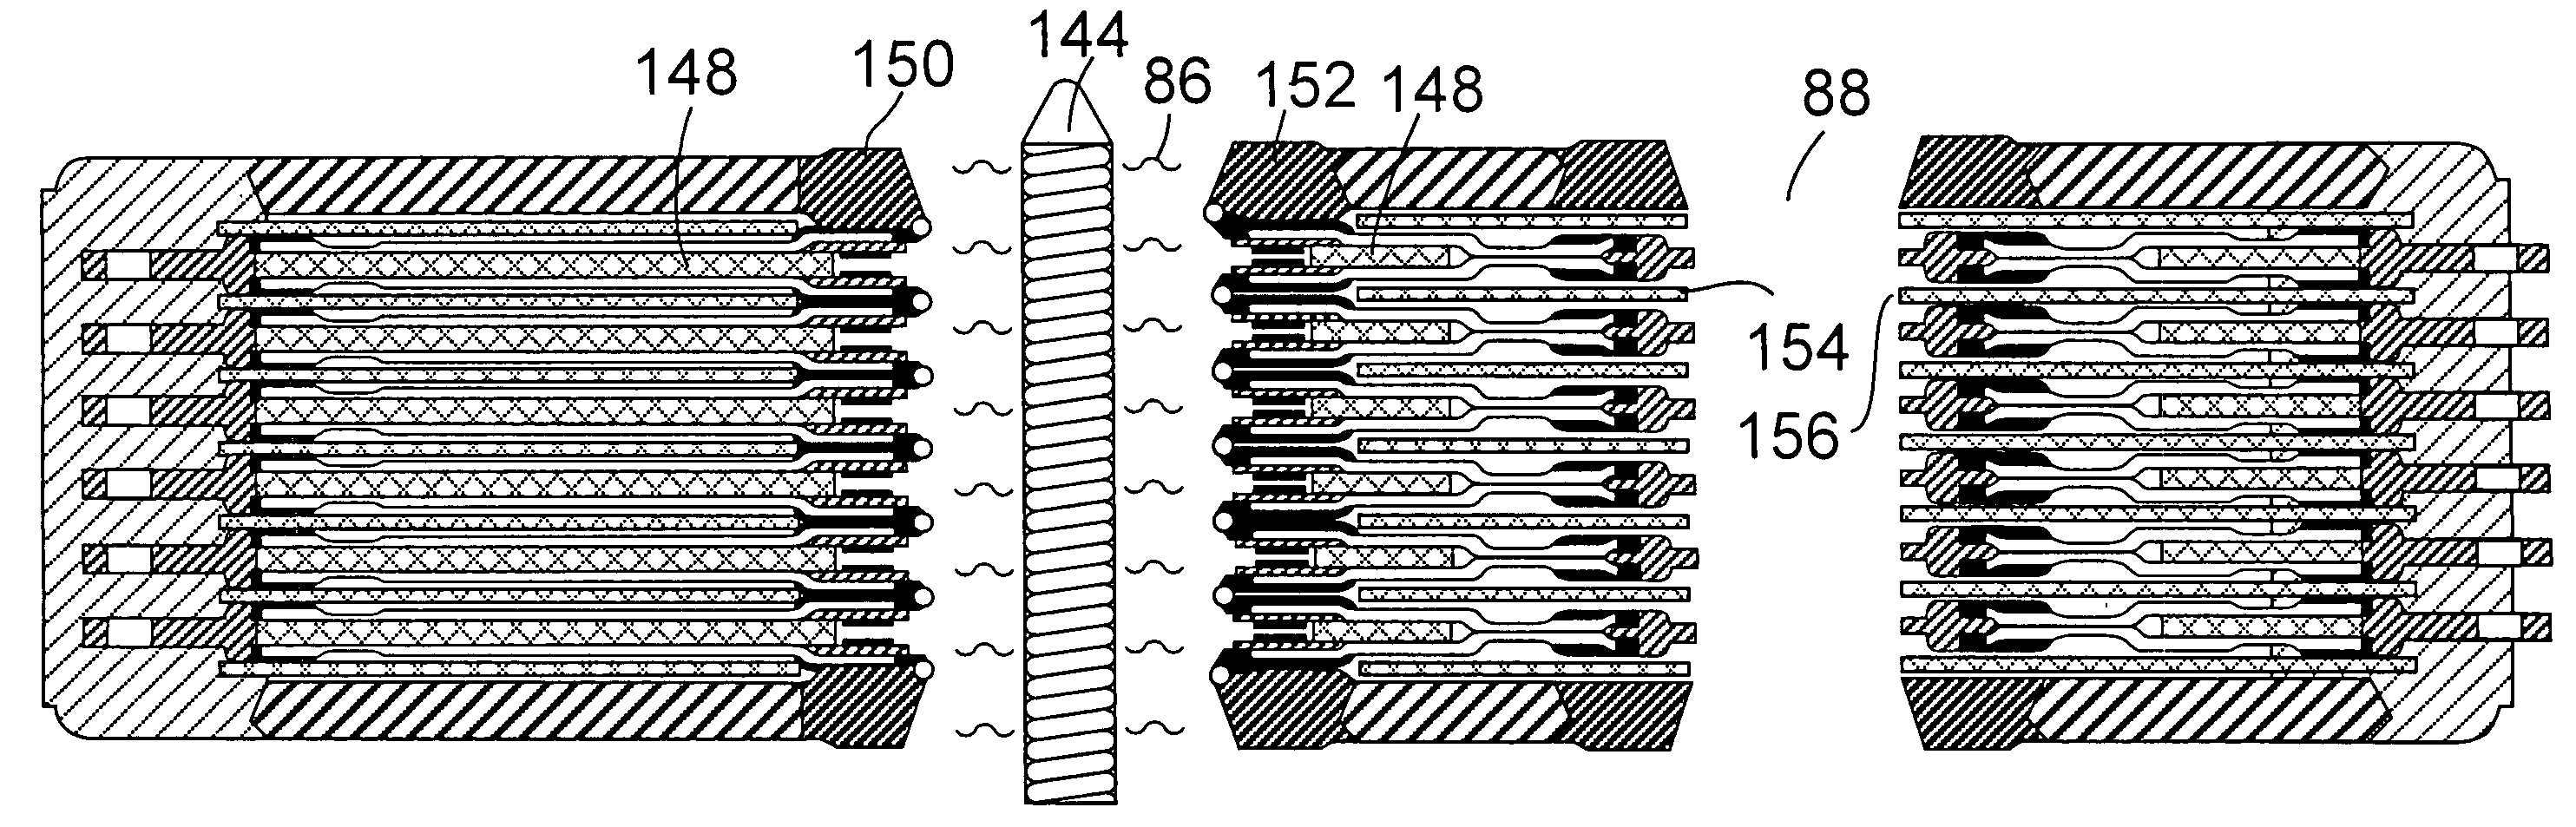 Process for making a fluid processing module